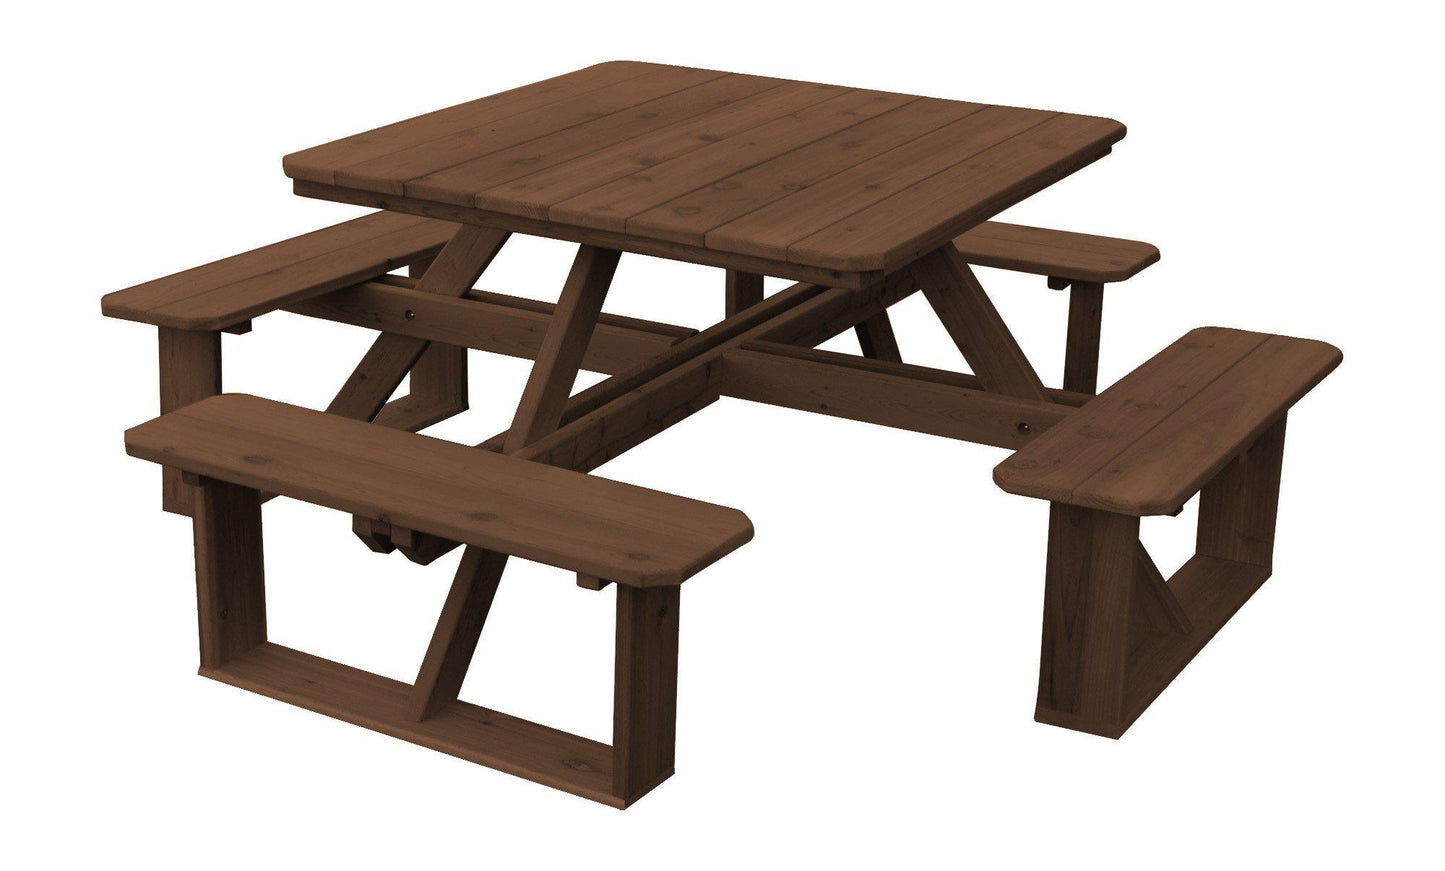 Regallion Outdoor Western Red Cedar 44"  Square Walk-In Table- Specify for FREE 2" Umbrella Hole - LEAD TIME TO SHIP 2 WEEKS